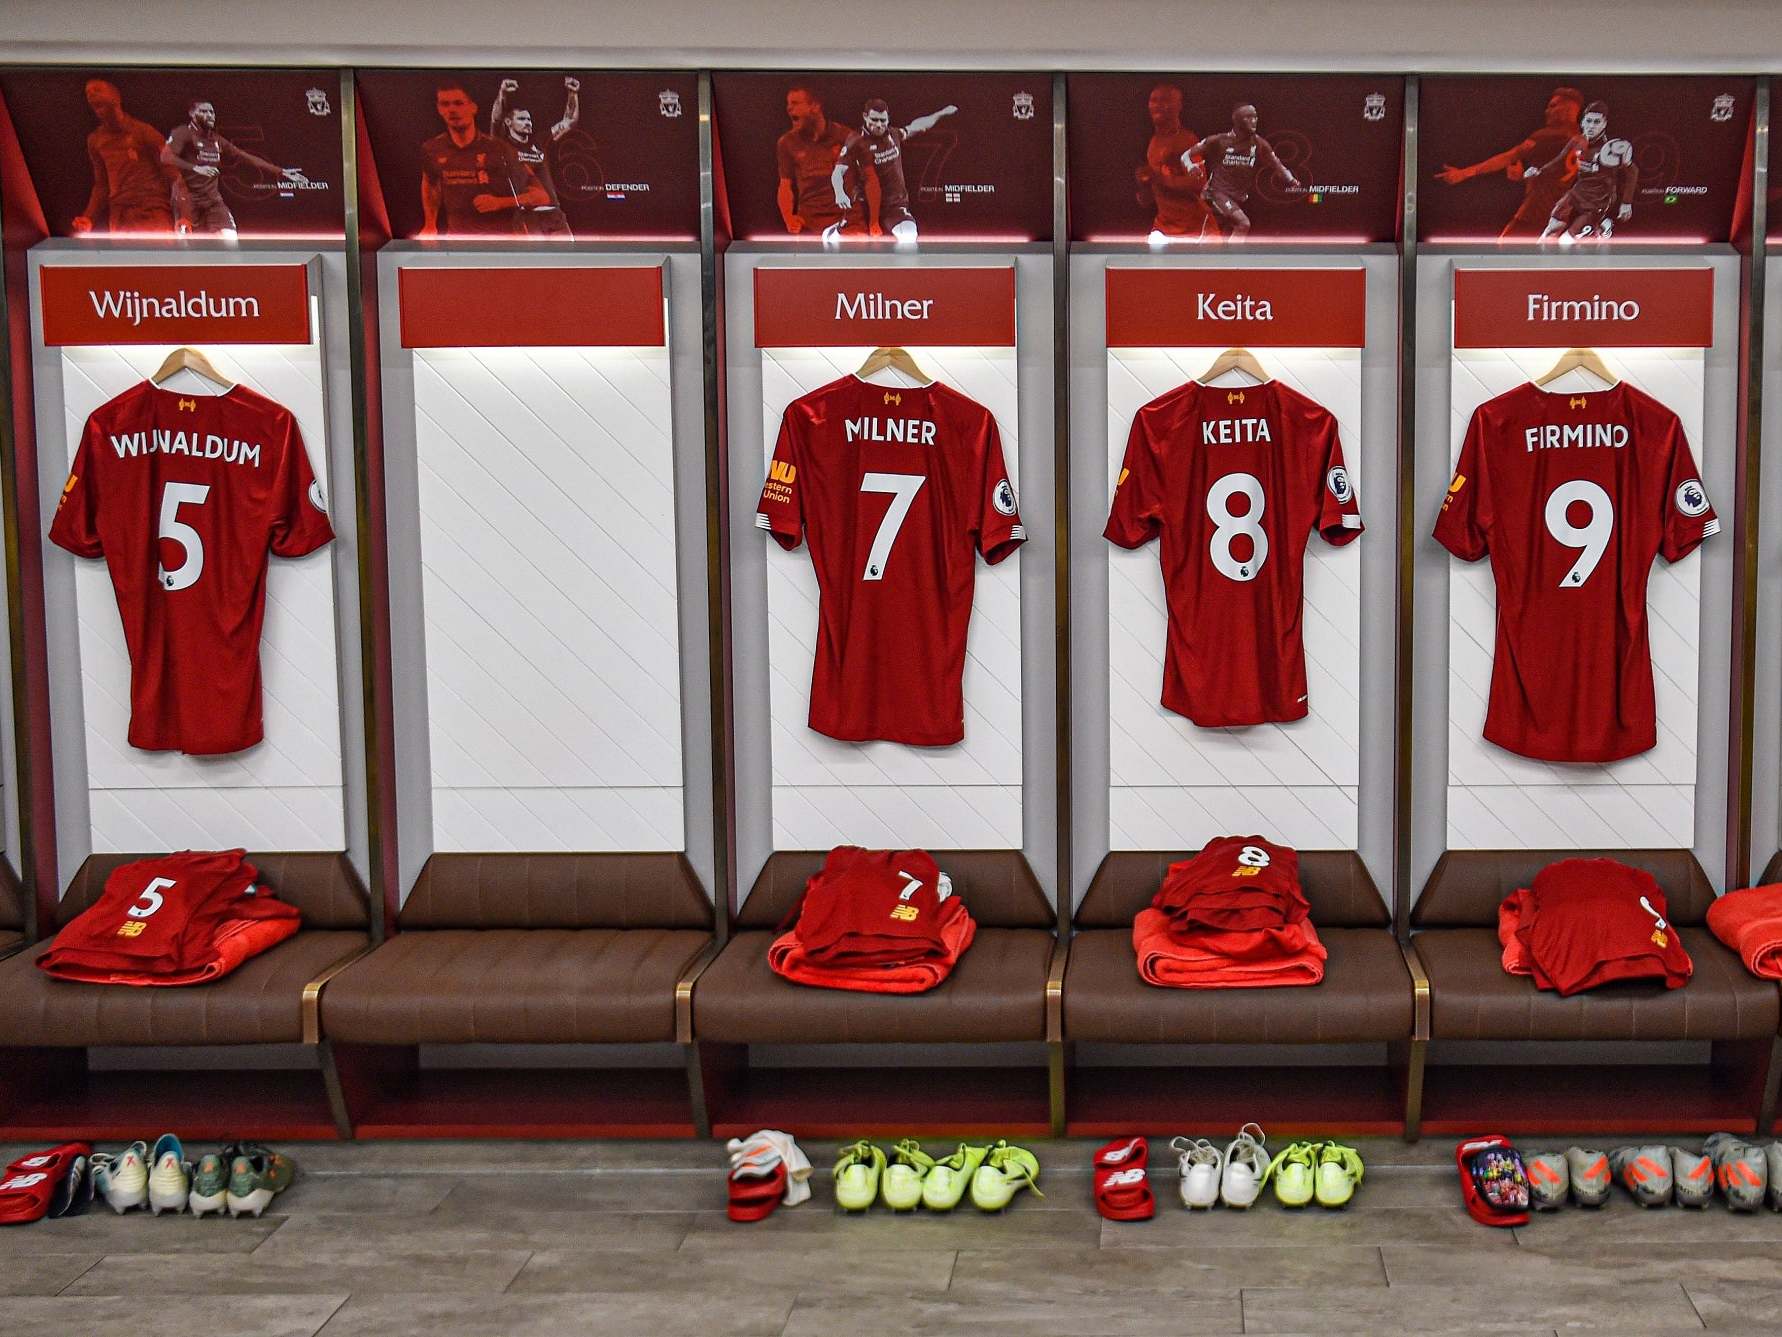 Liverpool vs Wolves LIVE: Team news, line-ups and more ahead of Premier League fixture today